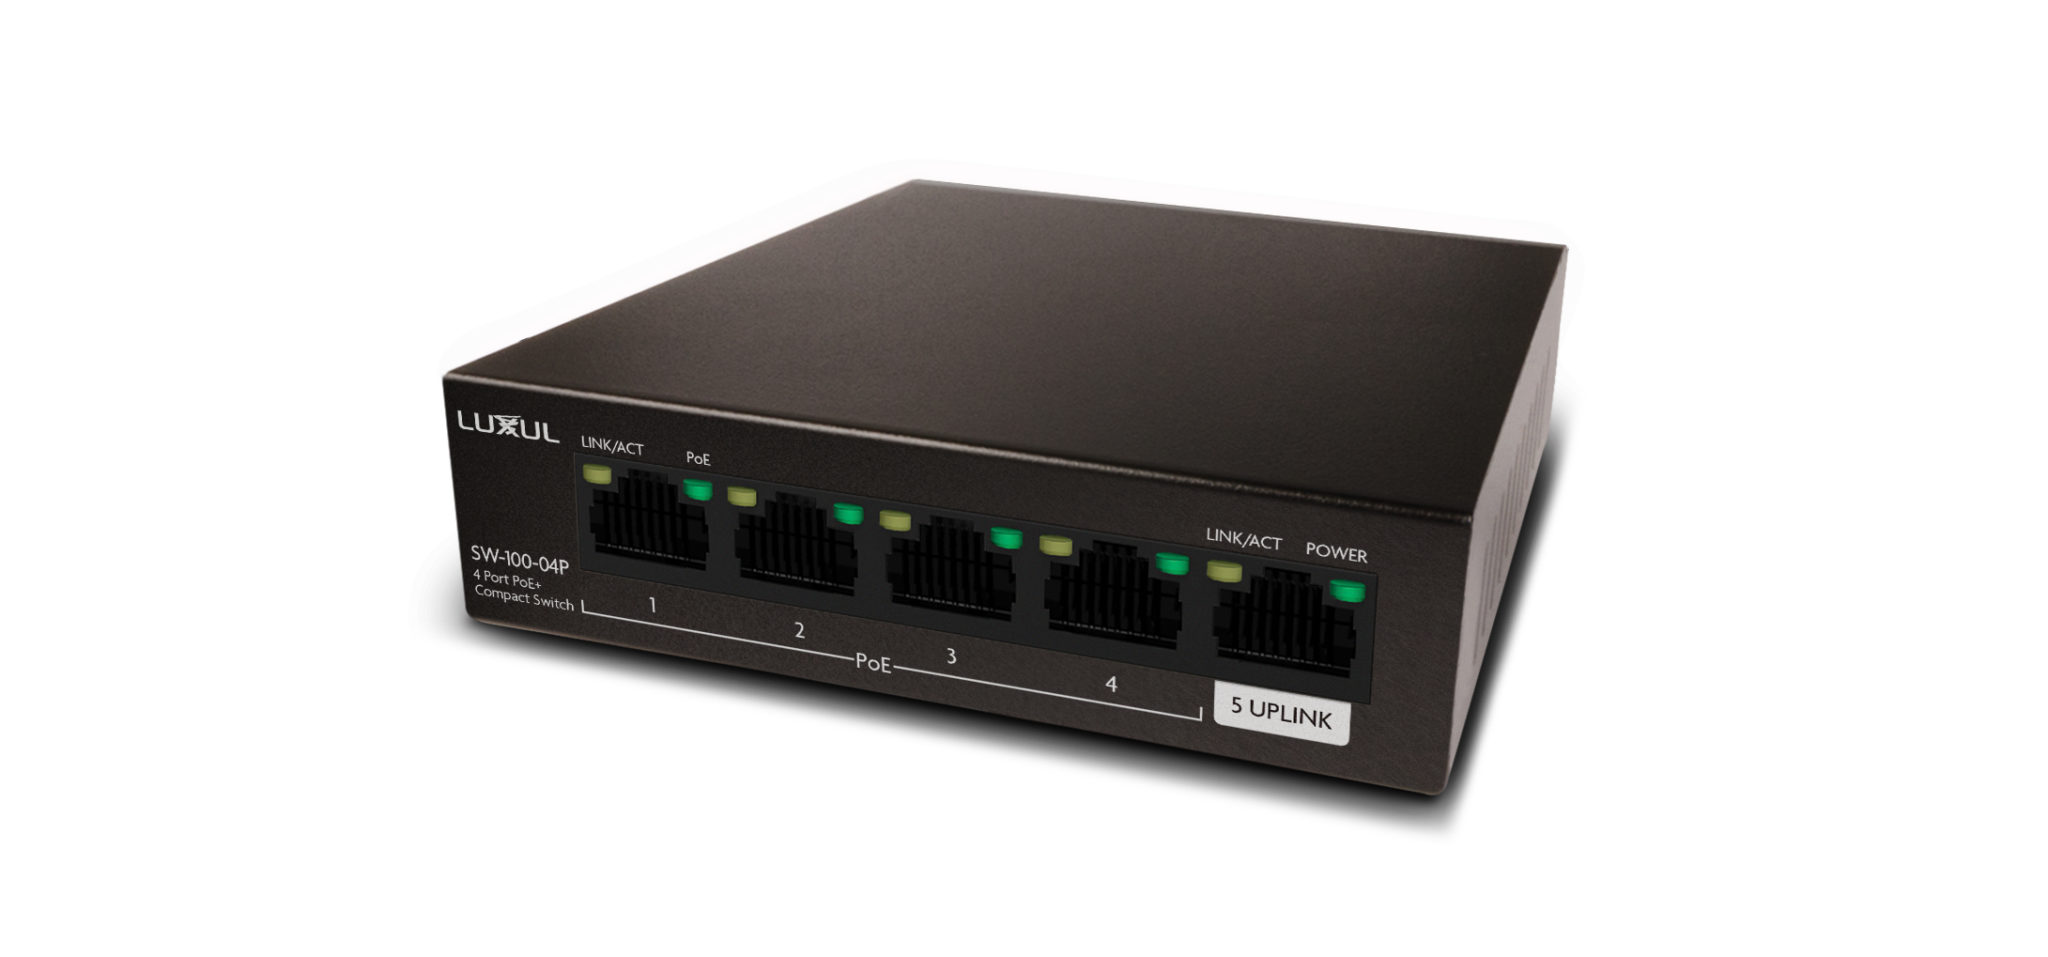 Luxul 4- and 8-Port Gigabit Compact PoE+ Switches Now Available